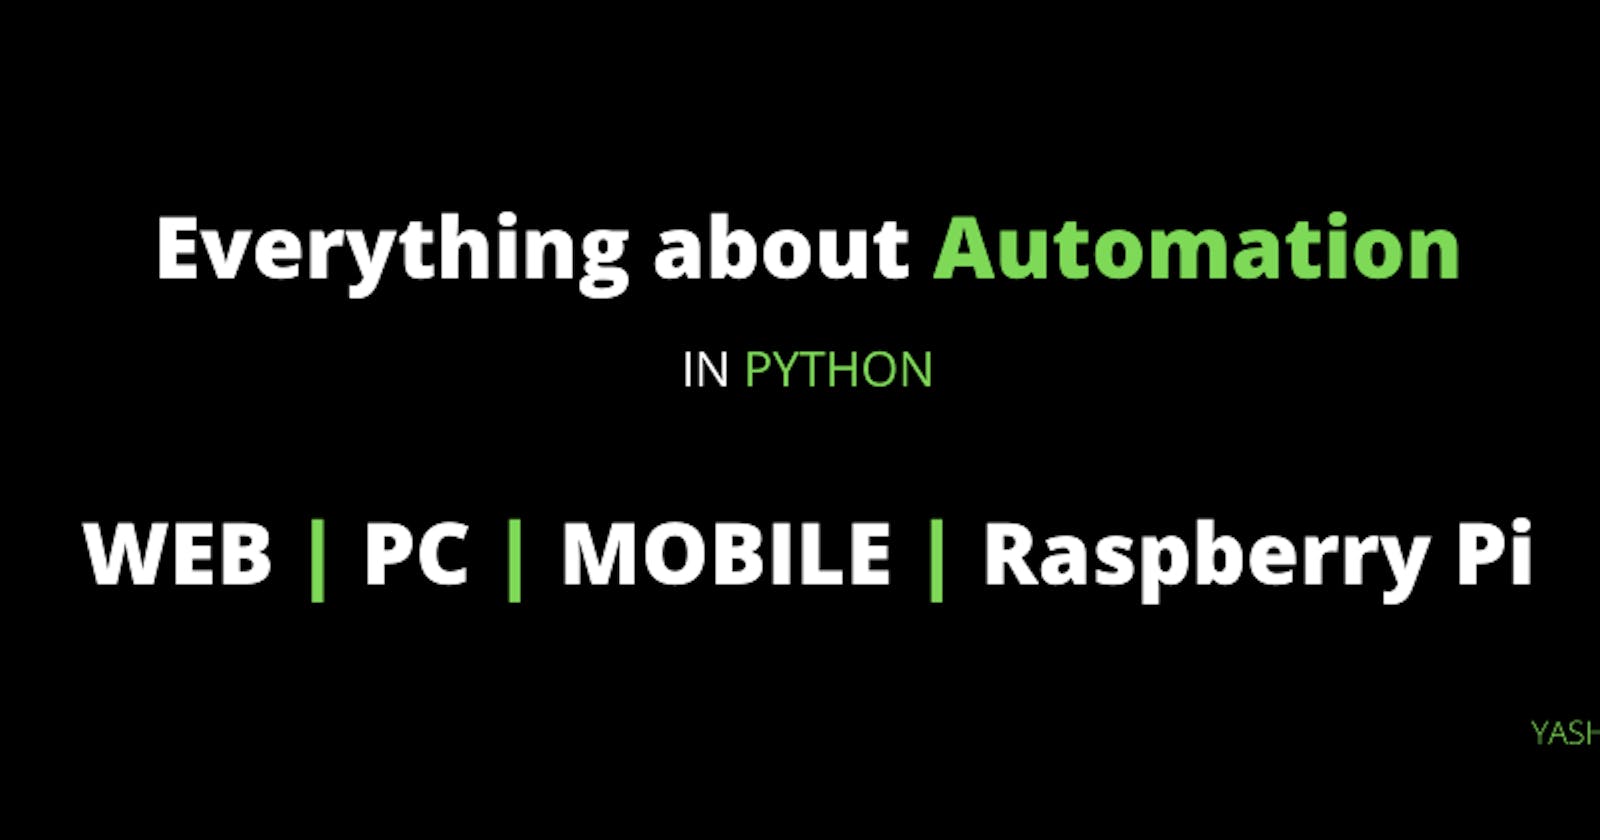 Everything about Automation in Python: PC, Mobile, Web, Raspberry Pi